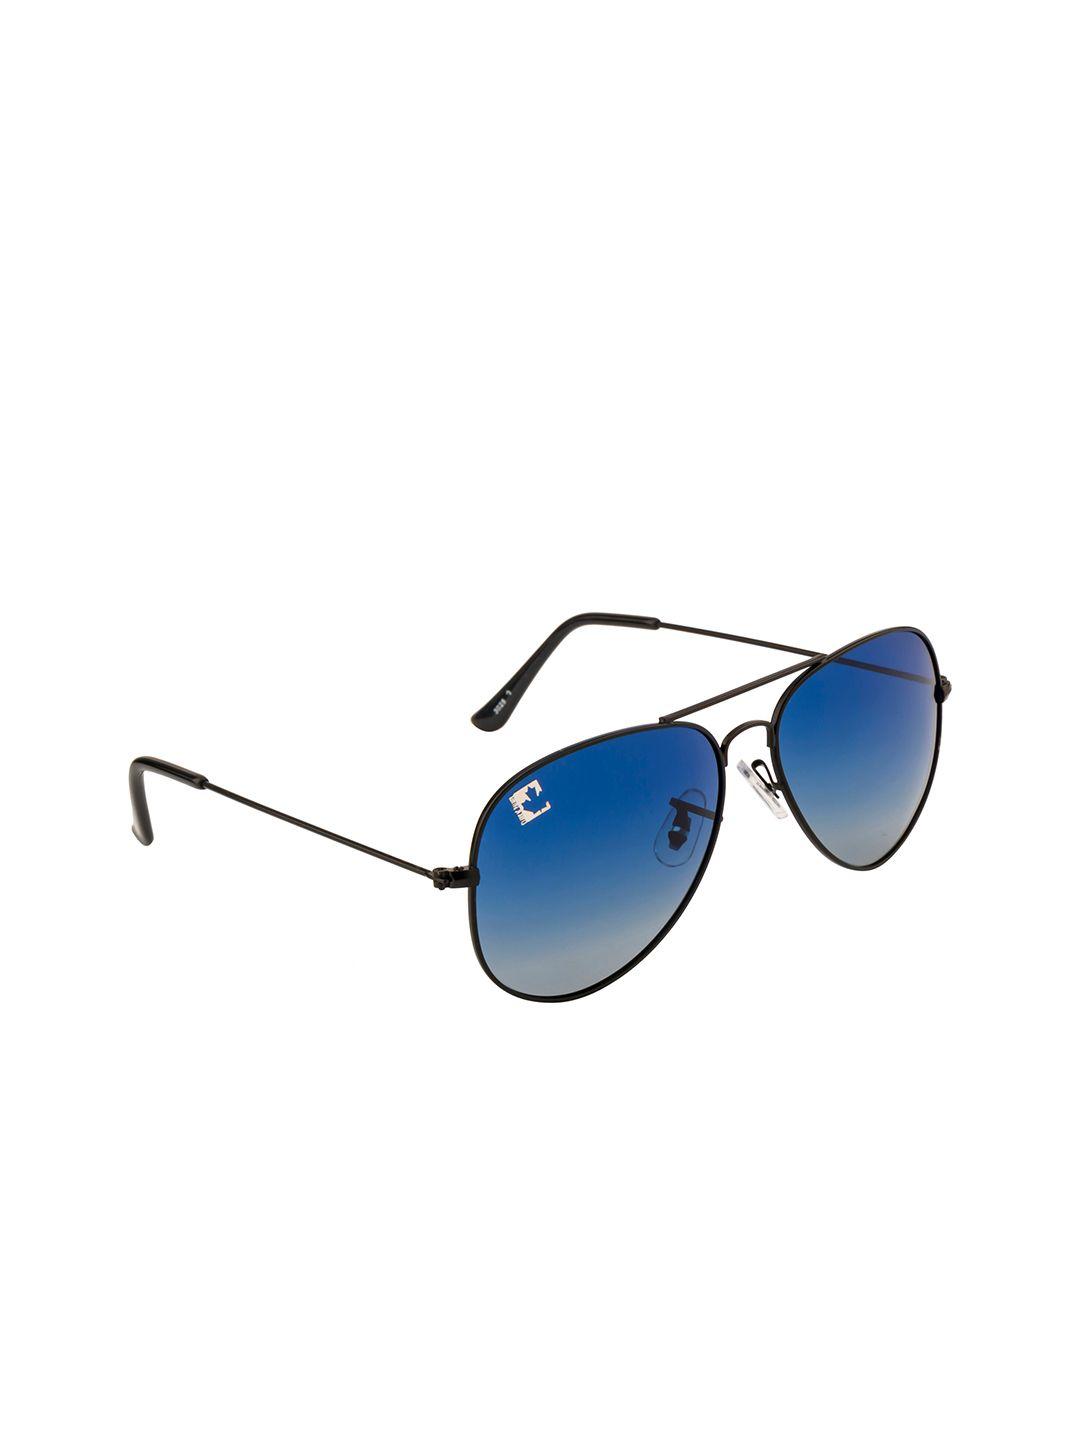 clark n palmer unisex sunglasses with polarised and uv protected lens cnp-sbn-865